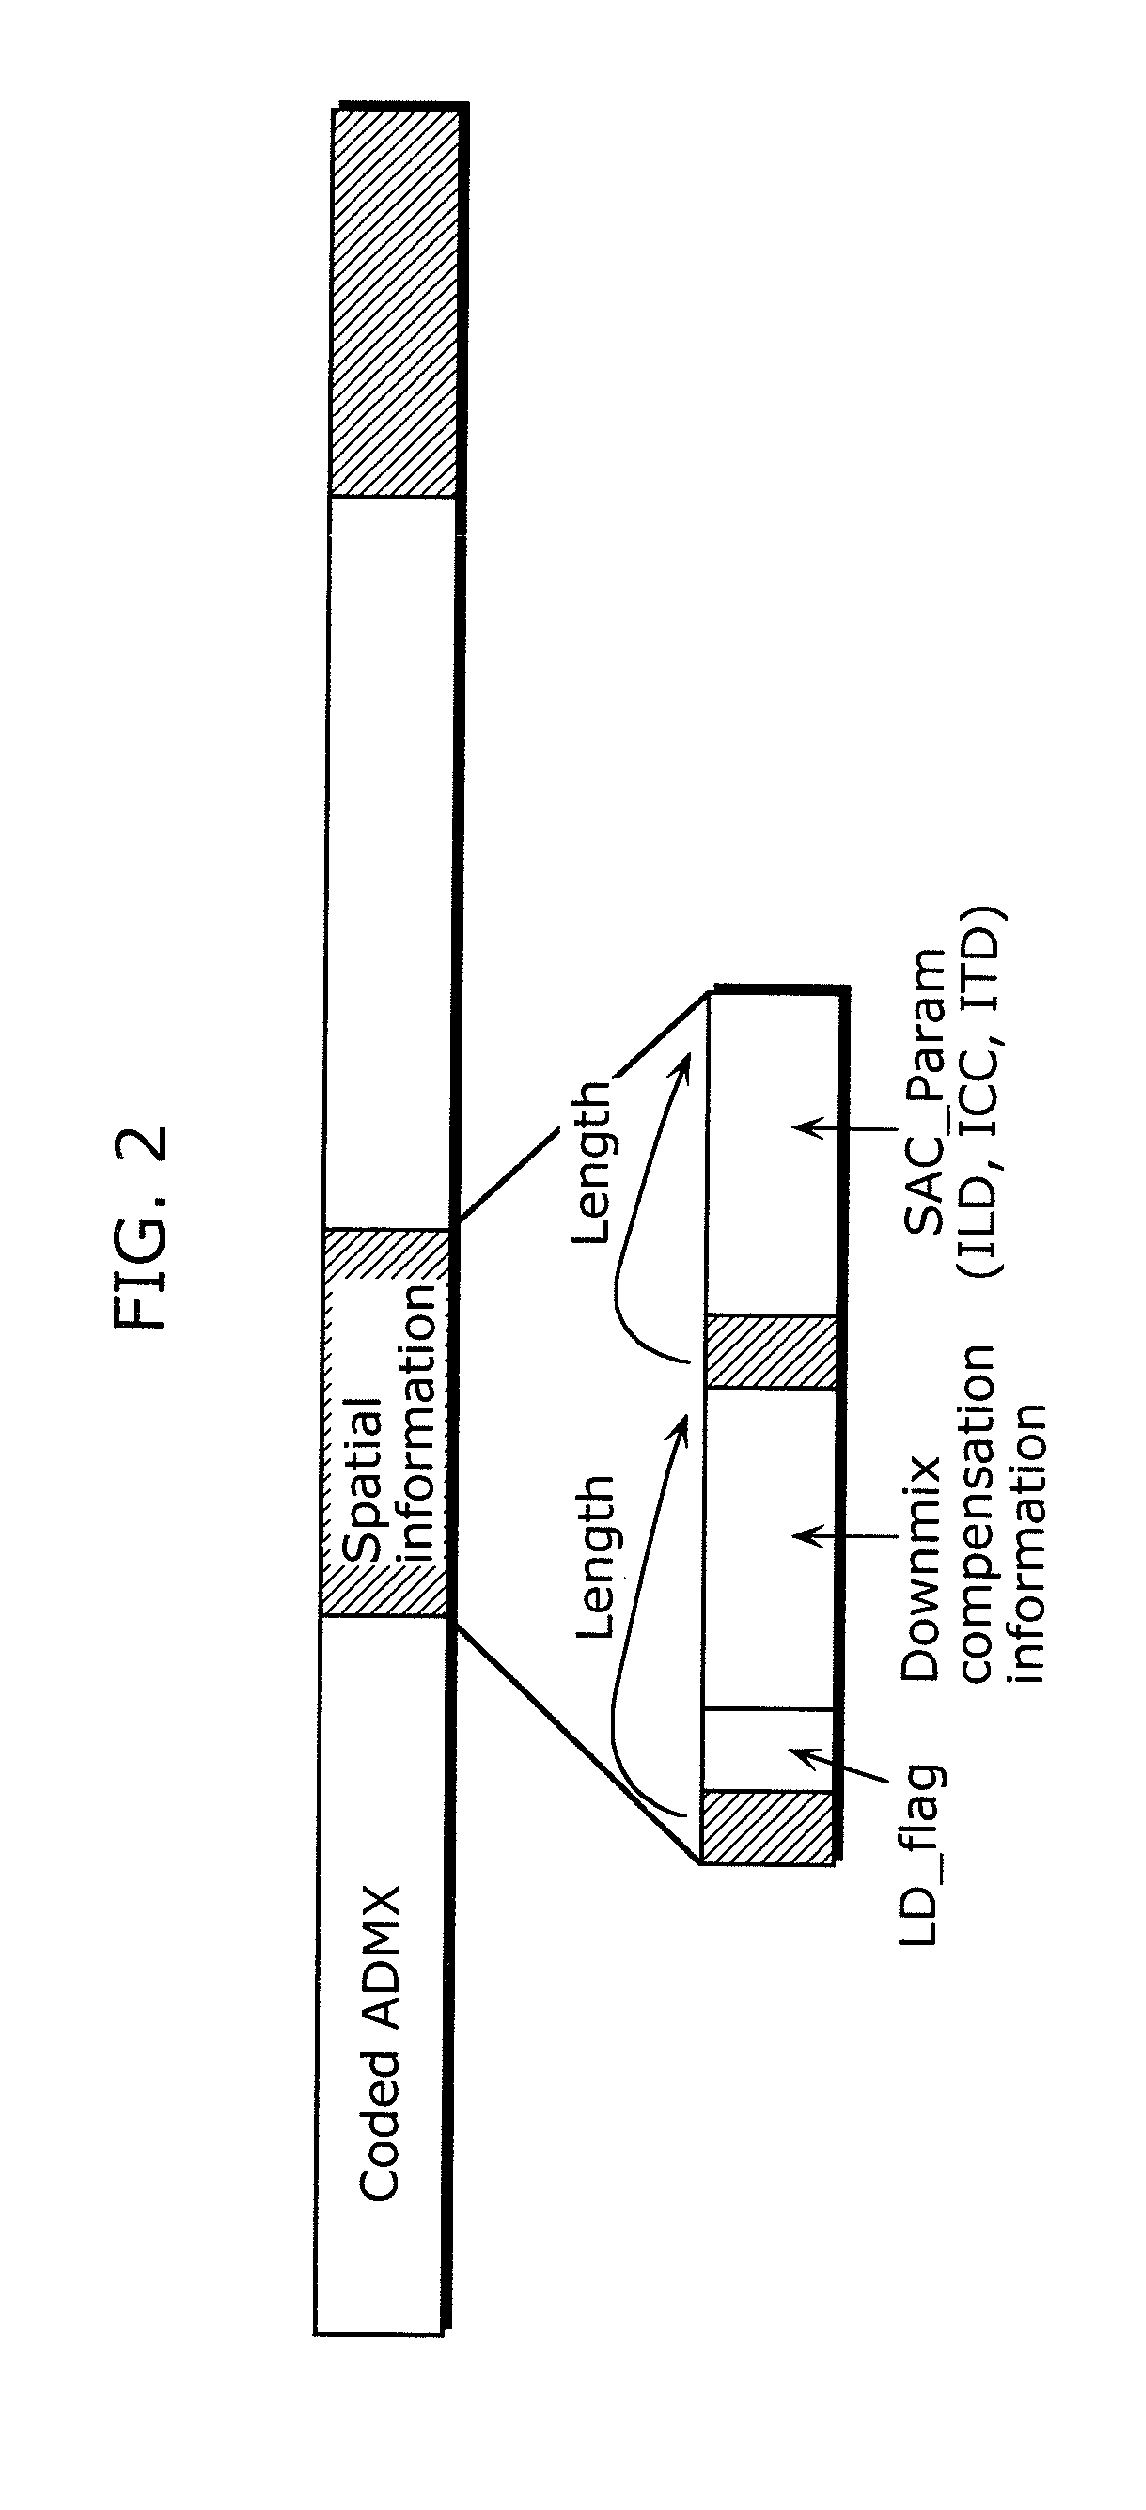 Reduced delay spatial coding and decoding apparatus and teleconferencing system